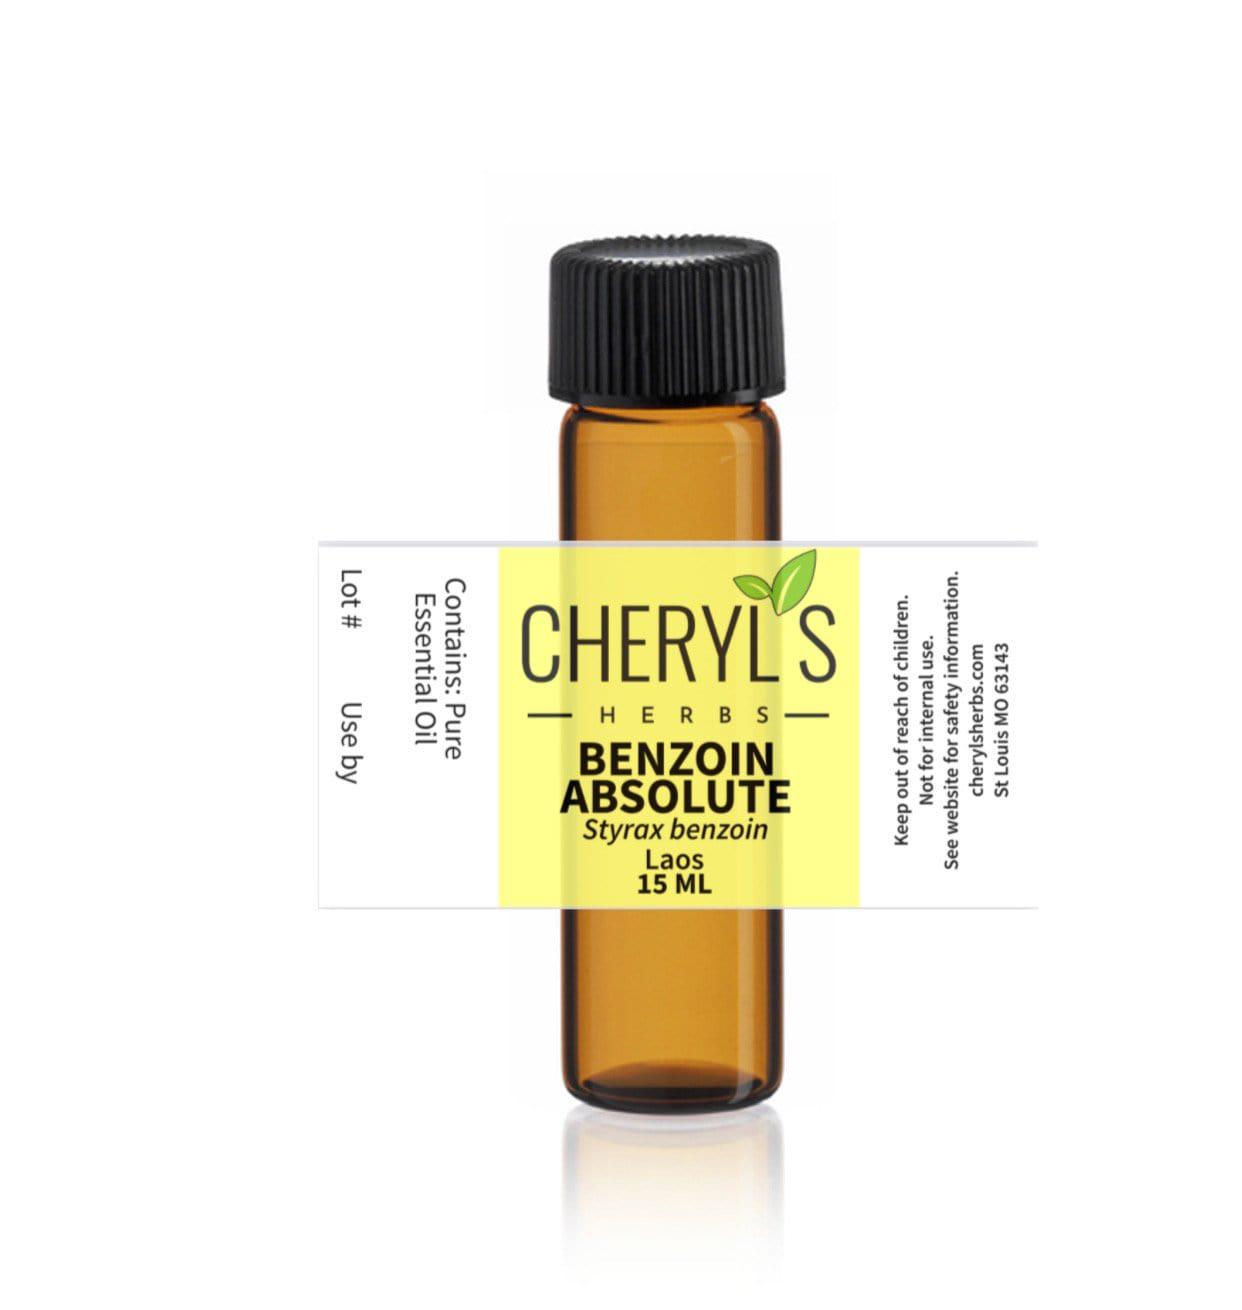 BENZOIN ABSOLUTE - Cheryls Herbs